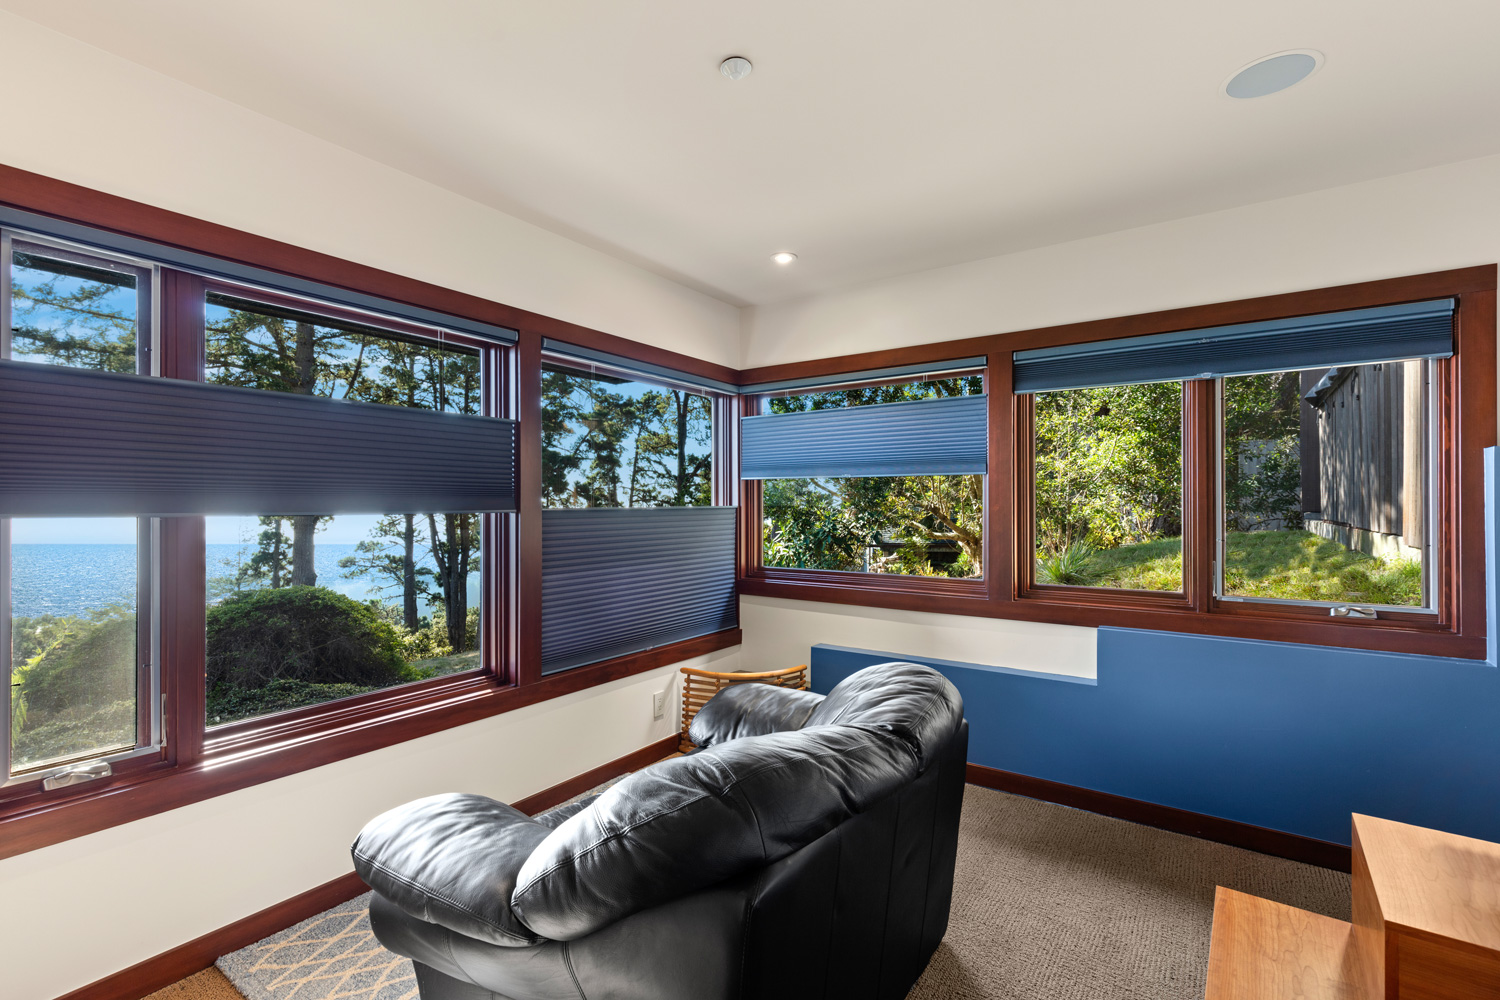 Blinds and Window treatments - Window coverings in home with view of the ocean